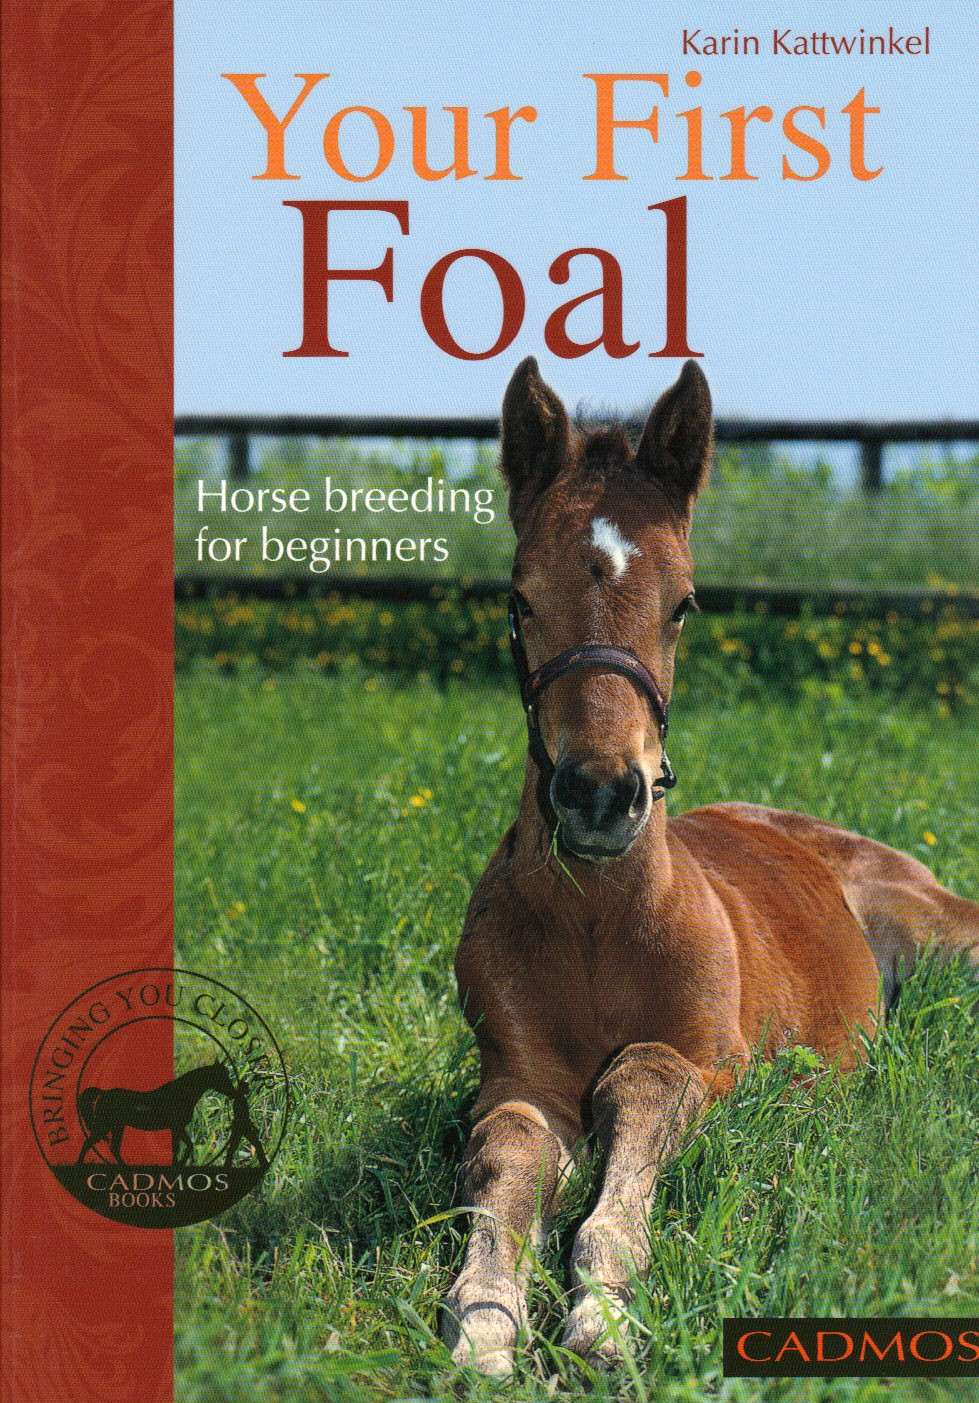 Book Your First Foal Horse Breeding for Beginners by Karin Kattwinkel from trot-online